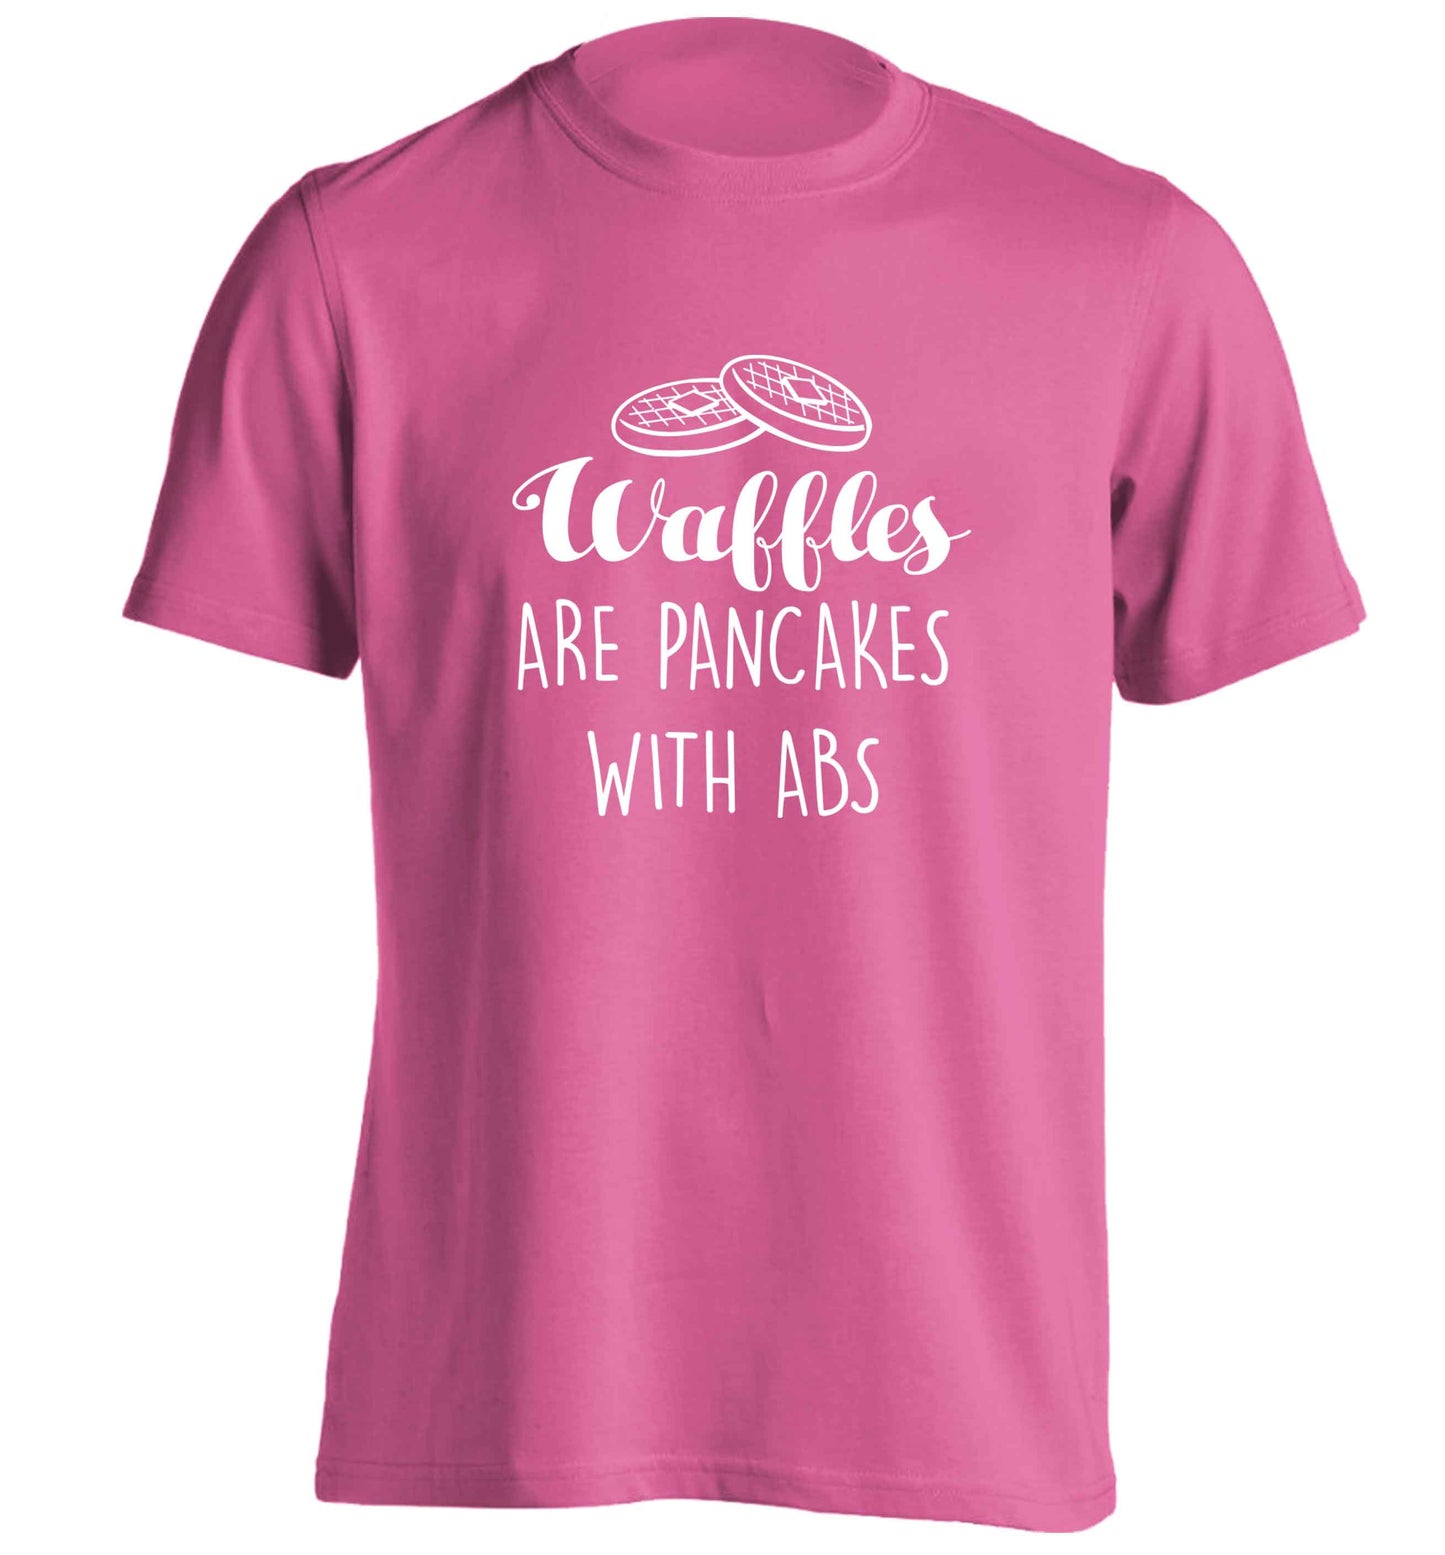 Waffles are just pancakes with abs adults unisex pink Tshirt 2XL